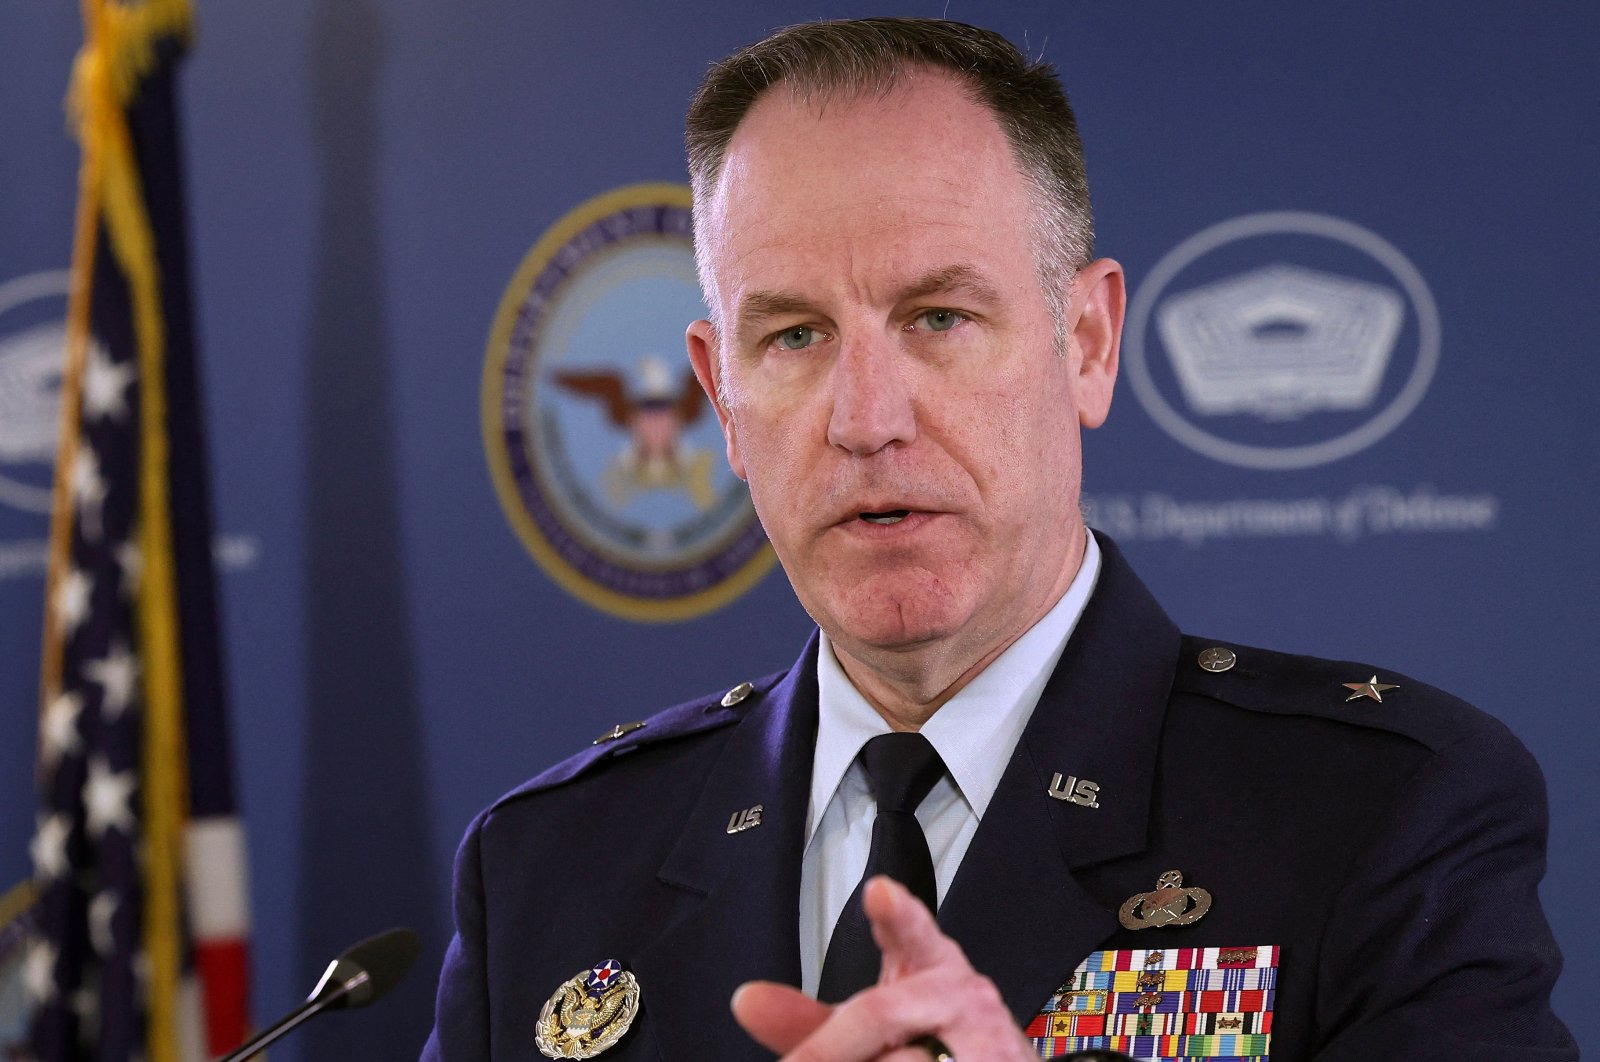 Pentagon spokesperson Air Force Brig. Gen. Patrick Ryder answers questions during a briefing at the Pentagon in Arlington, Virginia, U.S., March 16, 2023. (AFP Photo)